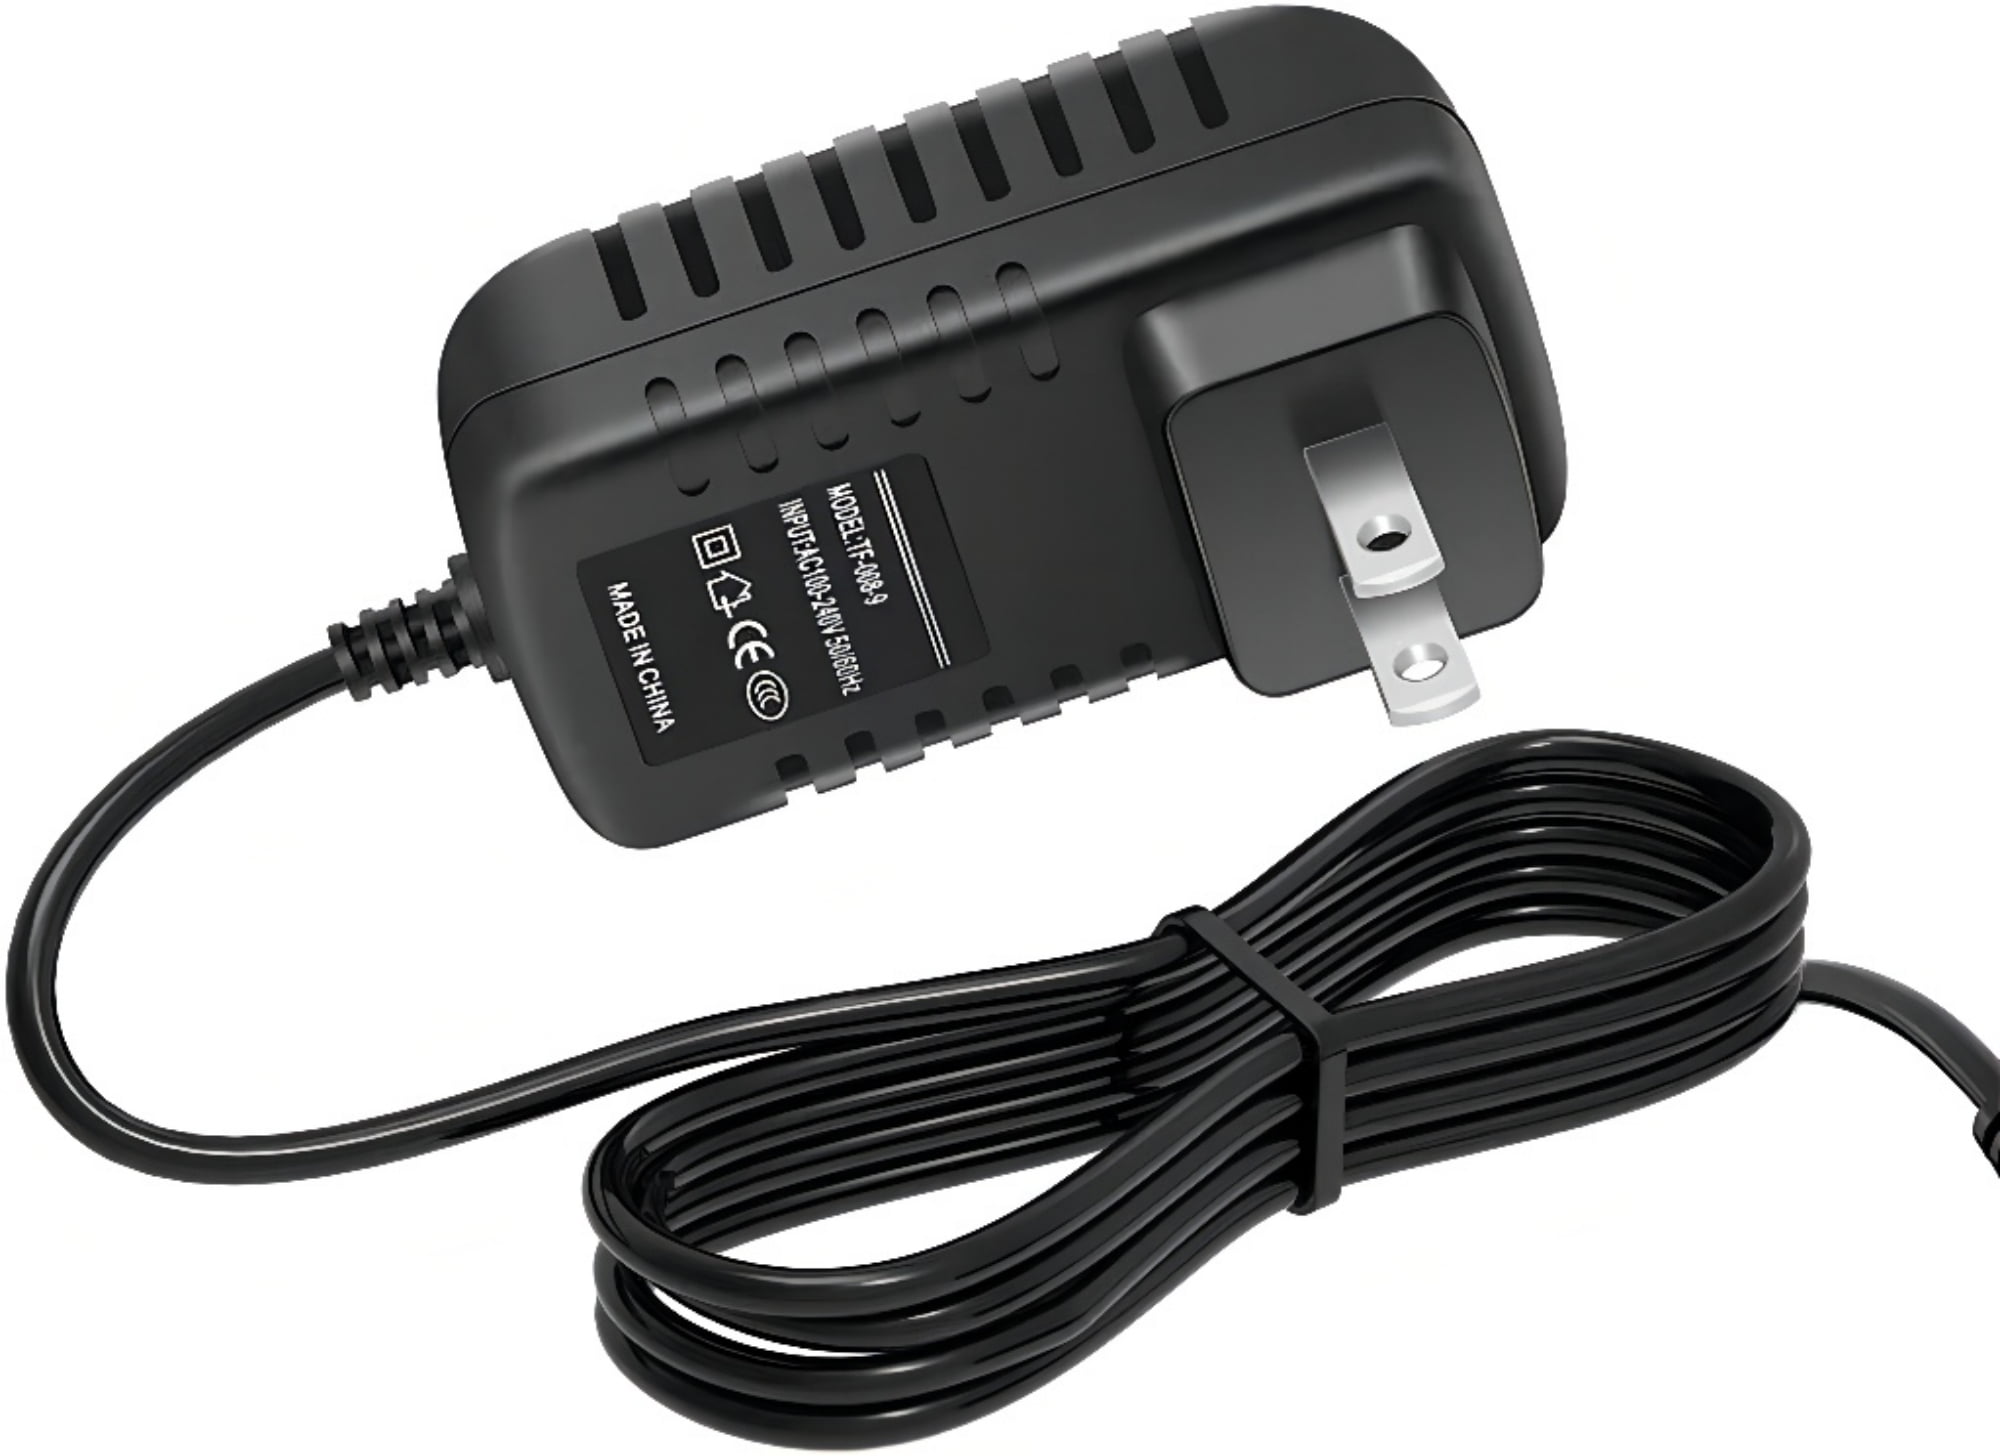 PK-Power AC Adapter For Xantrex Powerpack 200 300 300i 400 074-1004-01 Plus XPower Pack X Power Plus Portable Power Jump Starter Backup ; Xantrex Powerpack 400 Plus XPower Pack X 